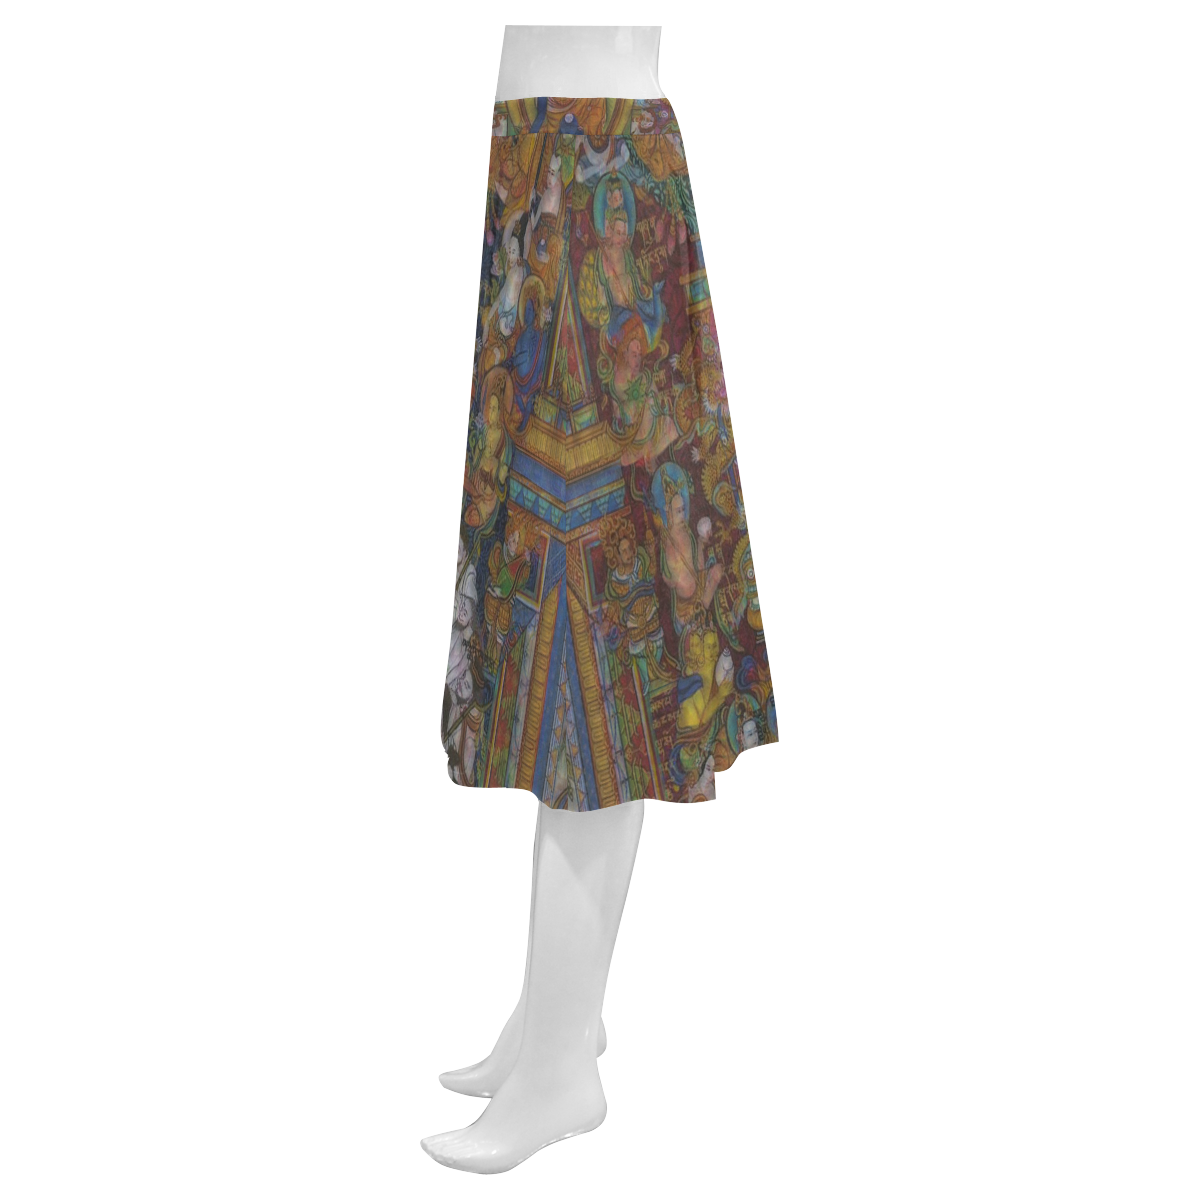 Awesome Thanka With The Holy Medicine Buddha Mnemosyne Women's Crepe Skirt (Model D16)